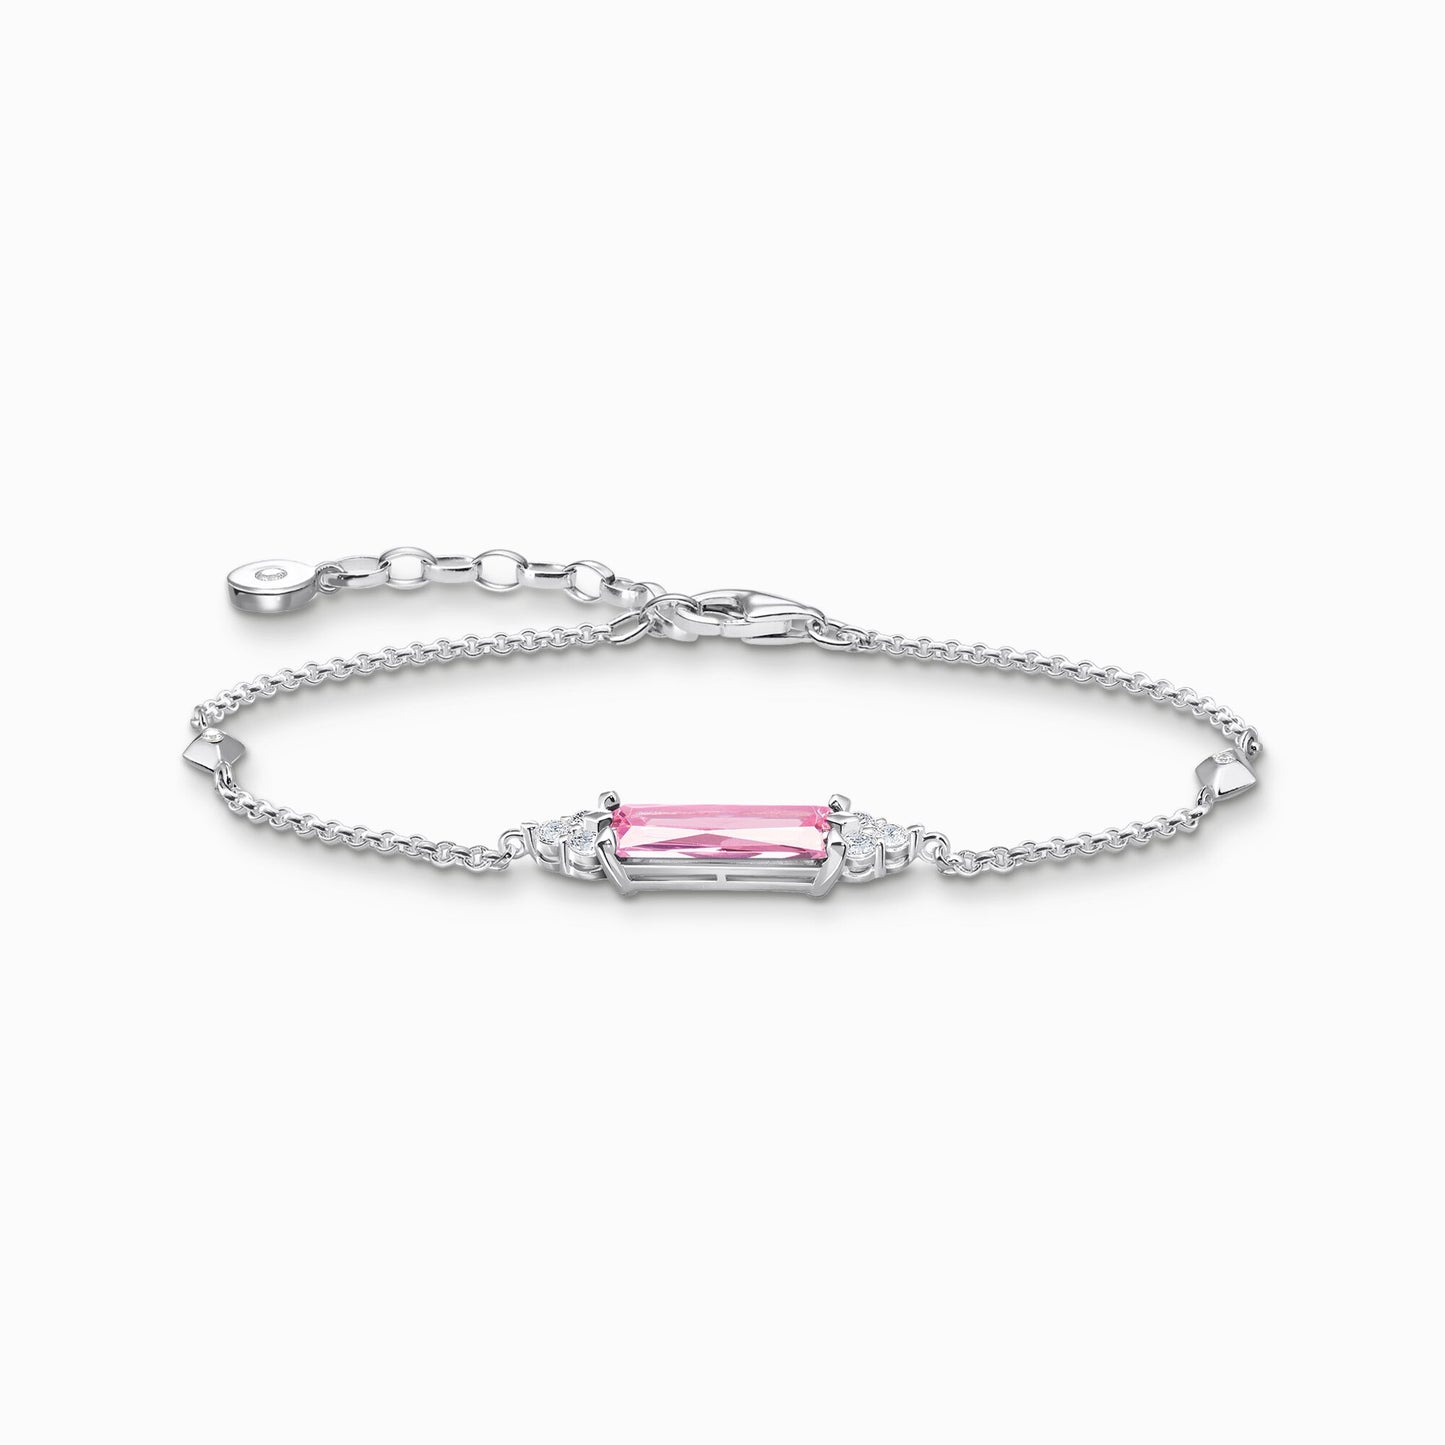 Bracelet with pink and white stones silver